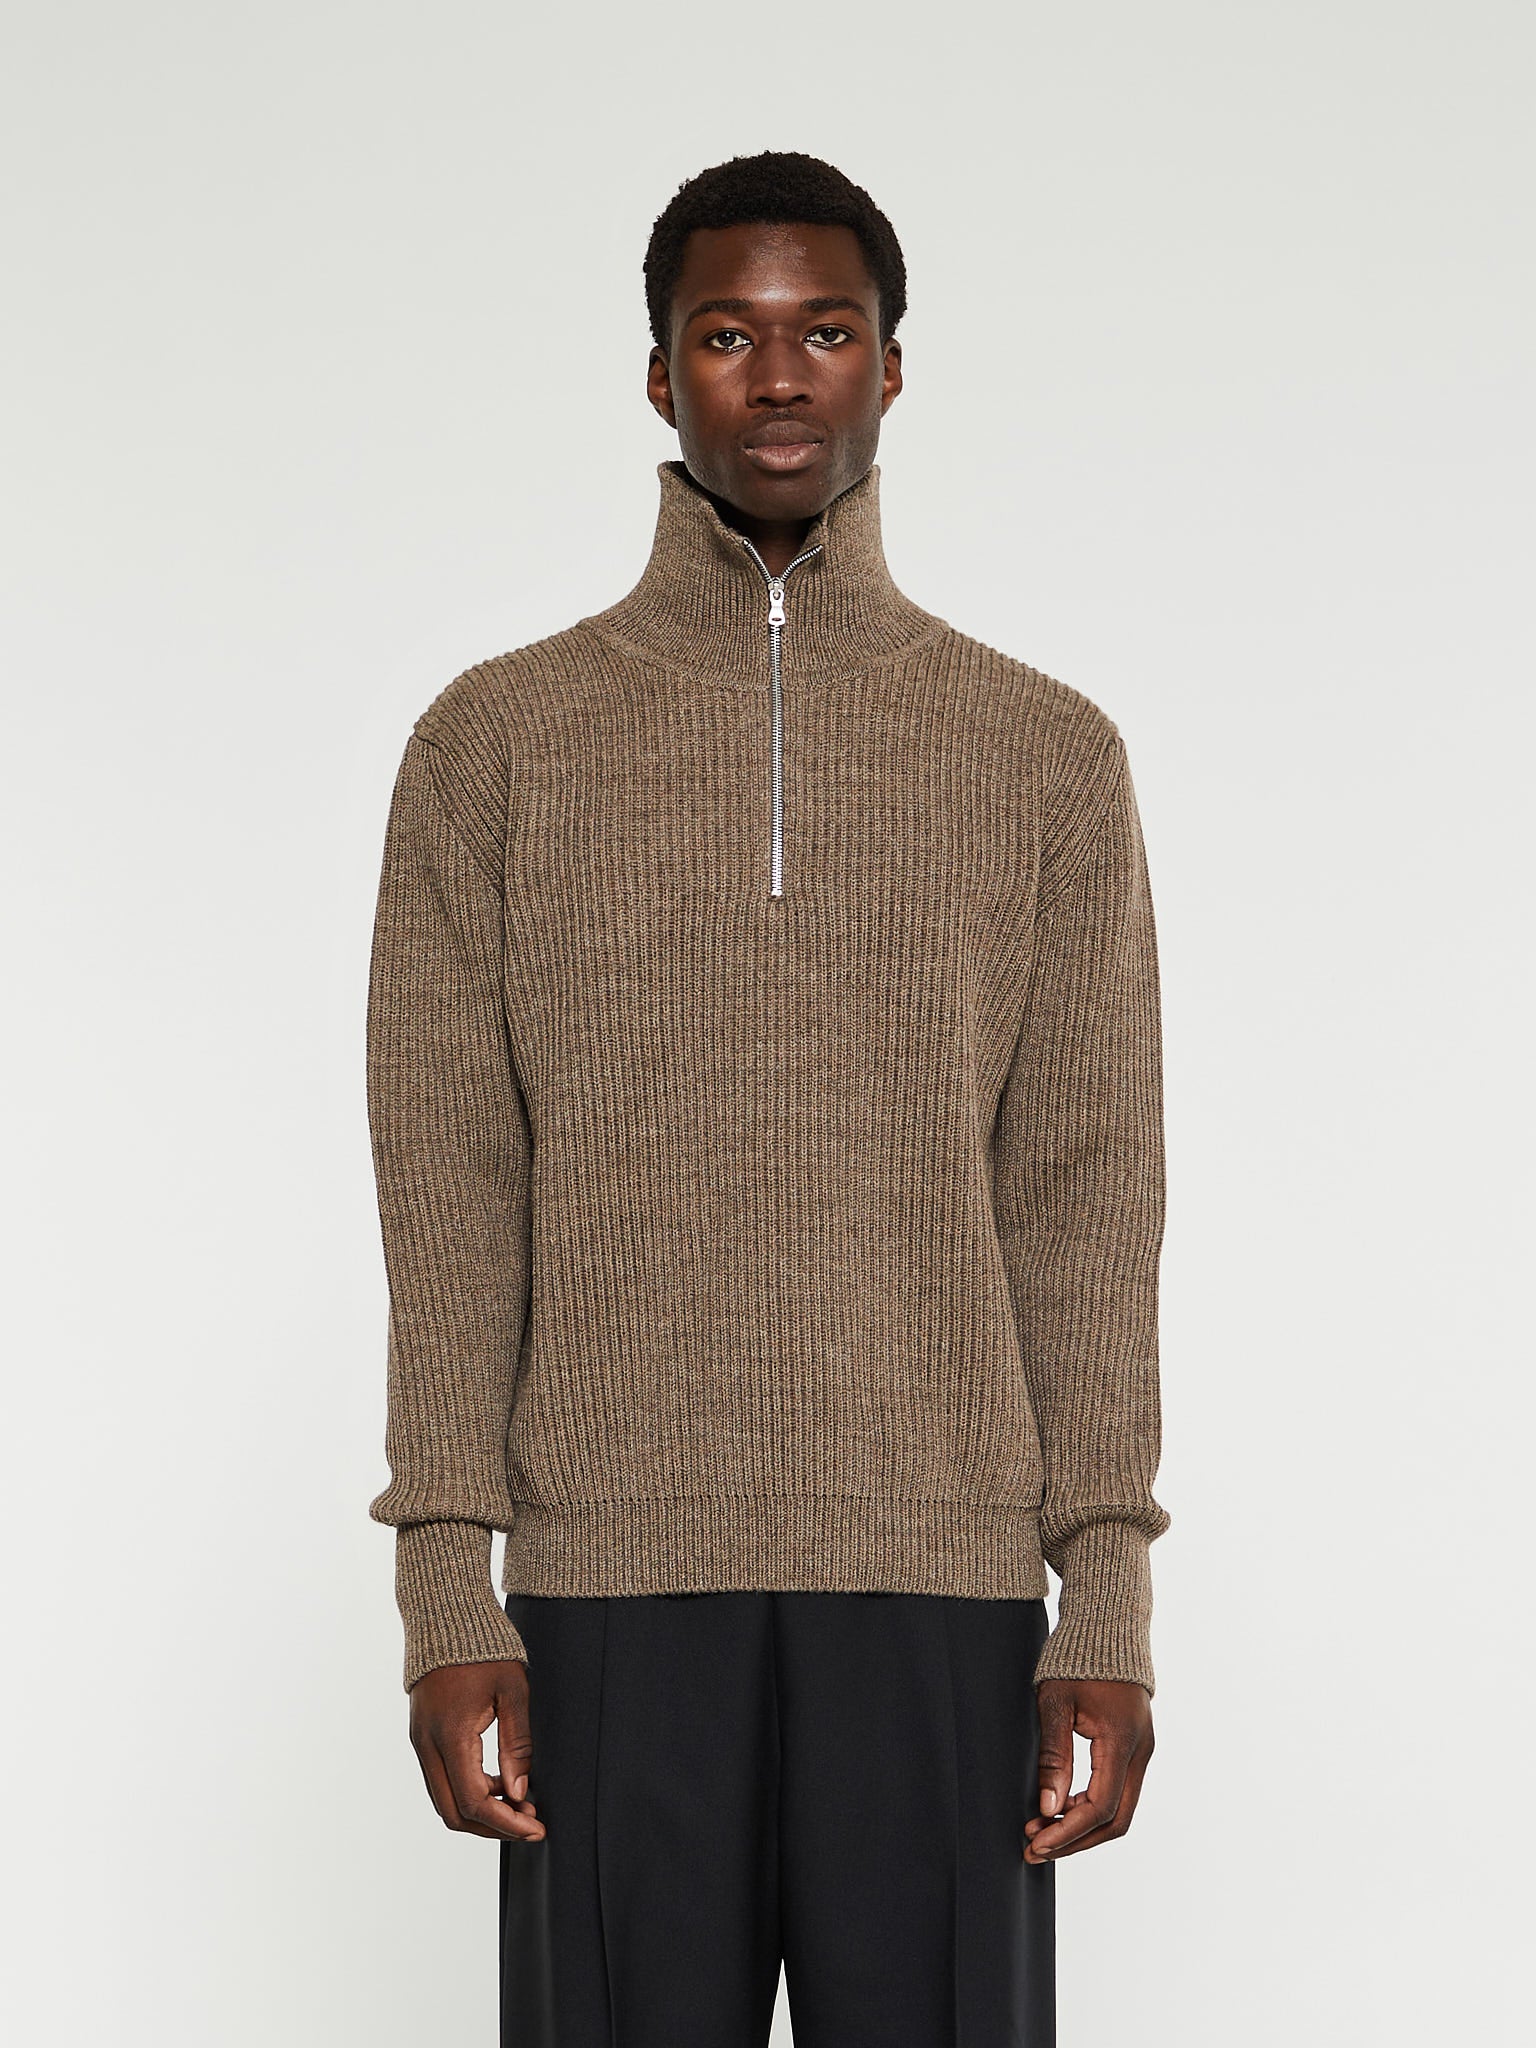 Navy Half Zip Knitwear in Natural Taupe